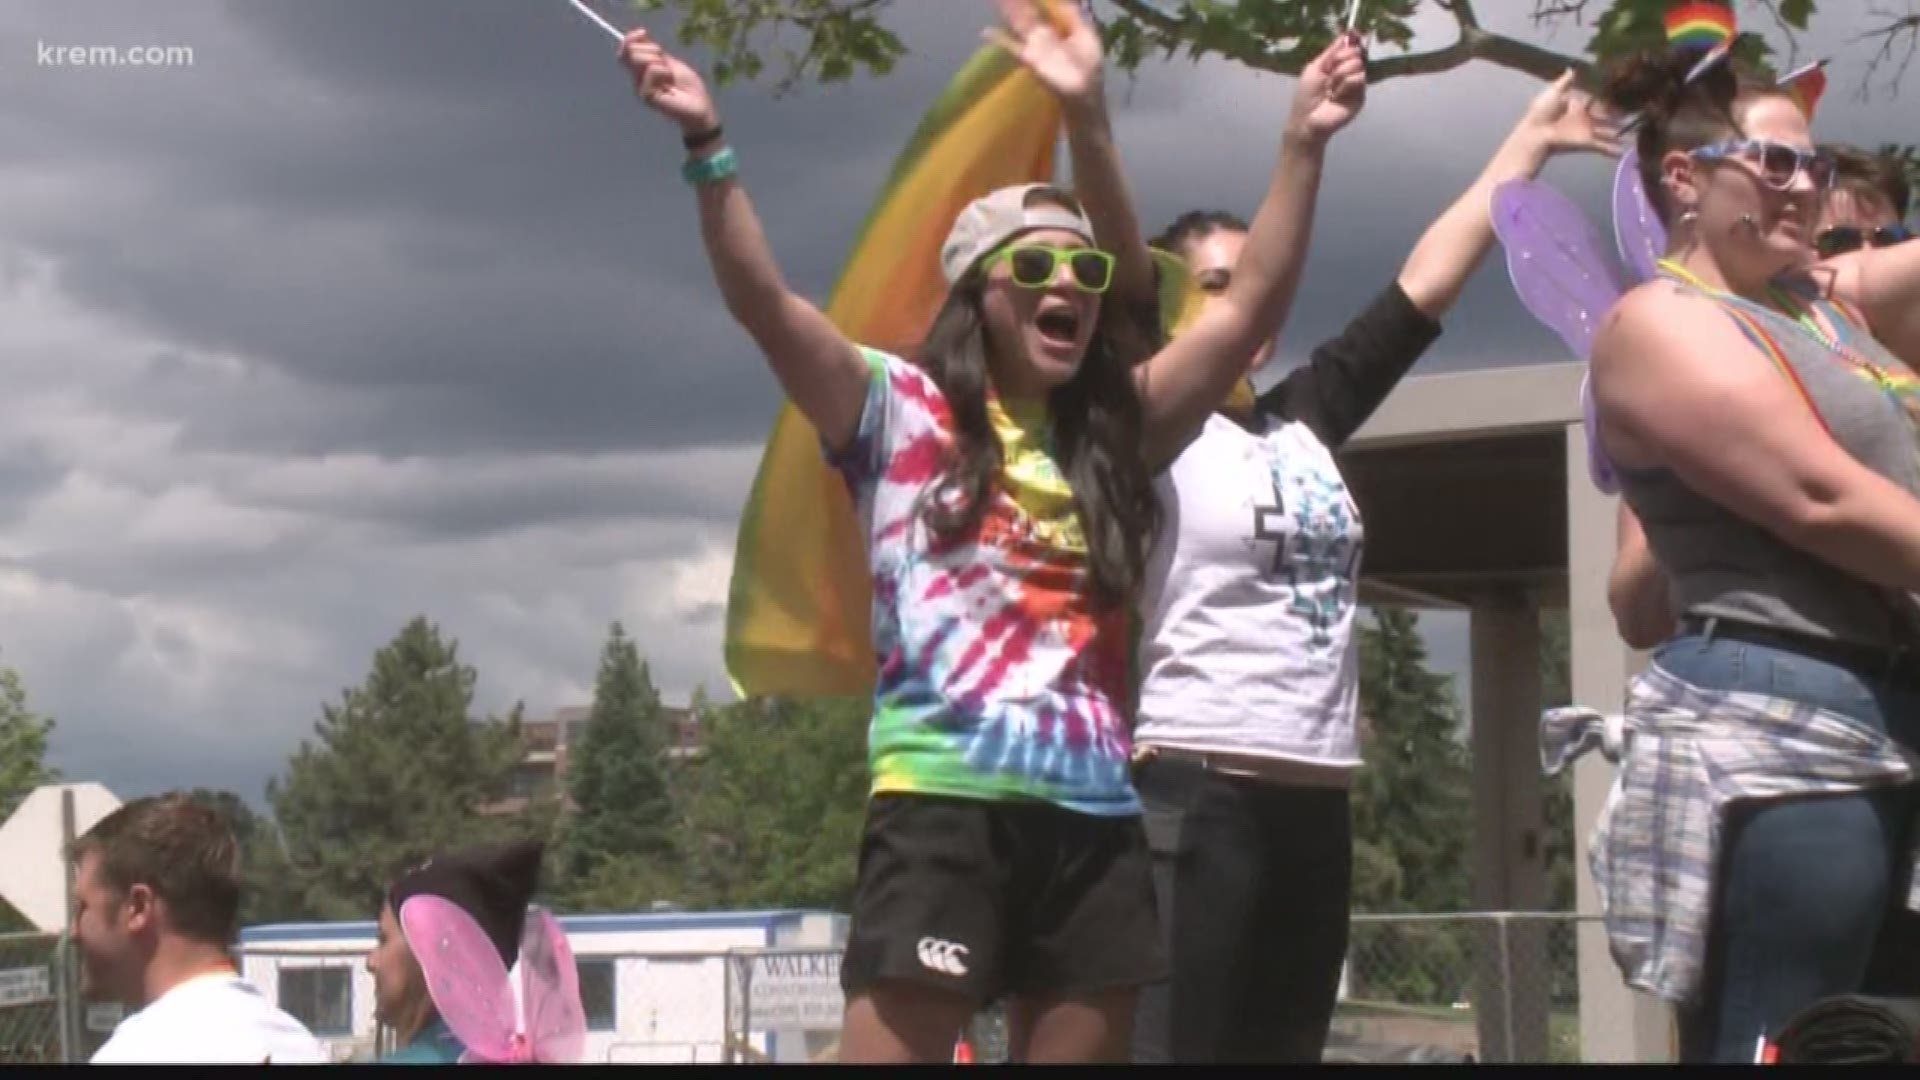 A look at the history of the Spokane Pride Parade